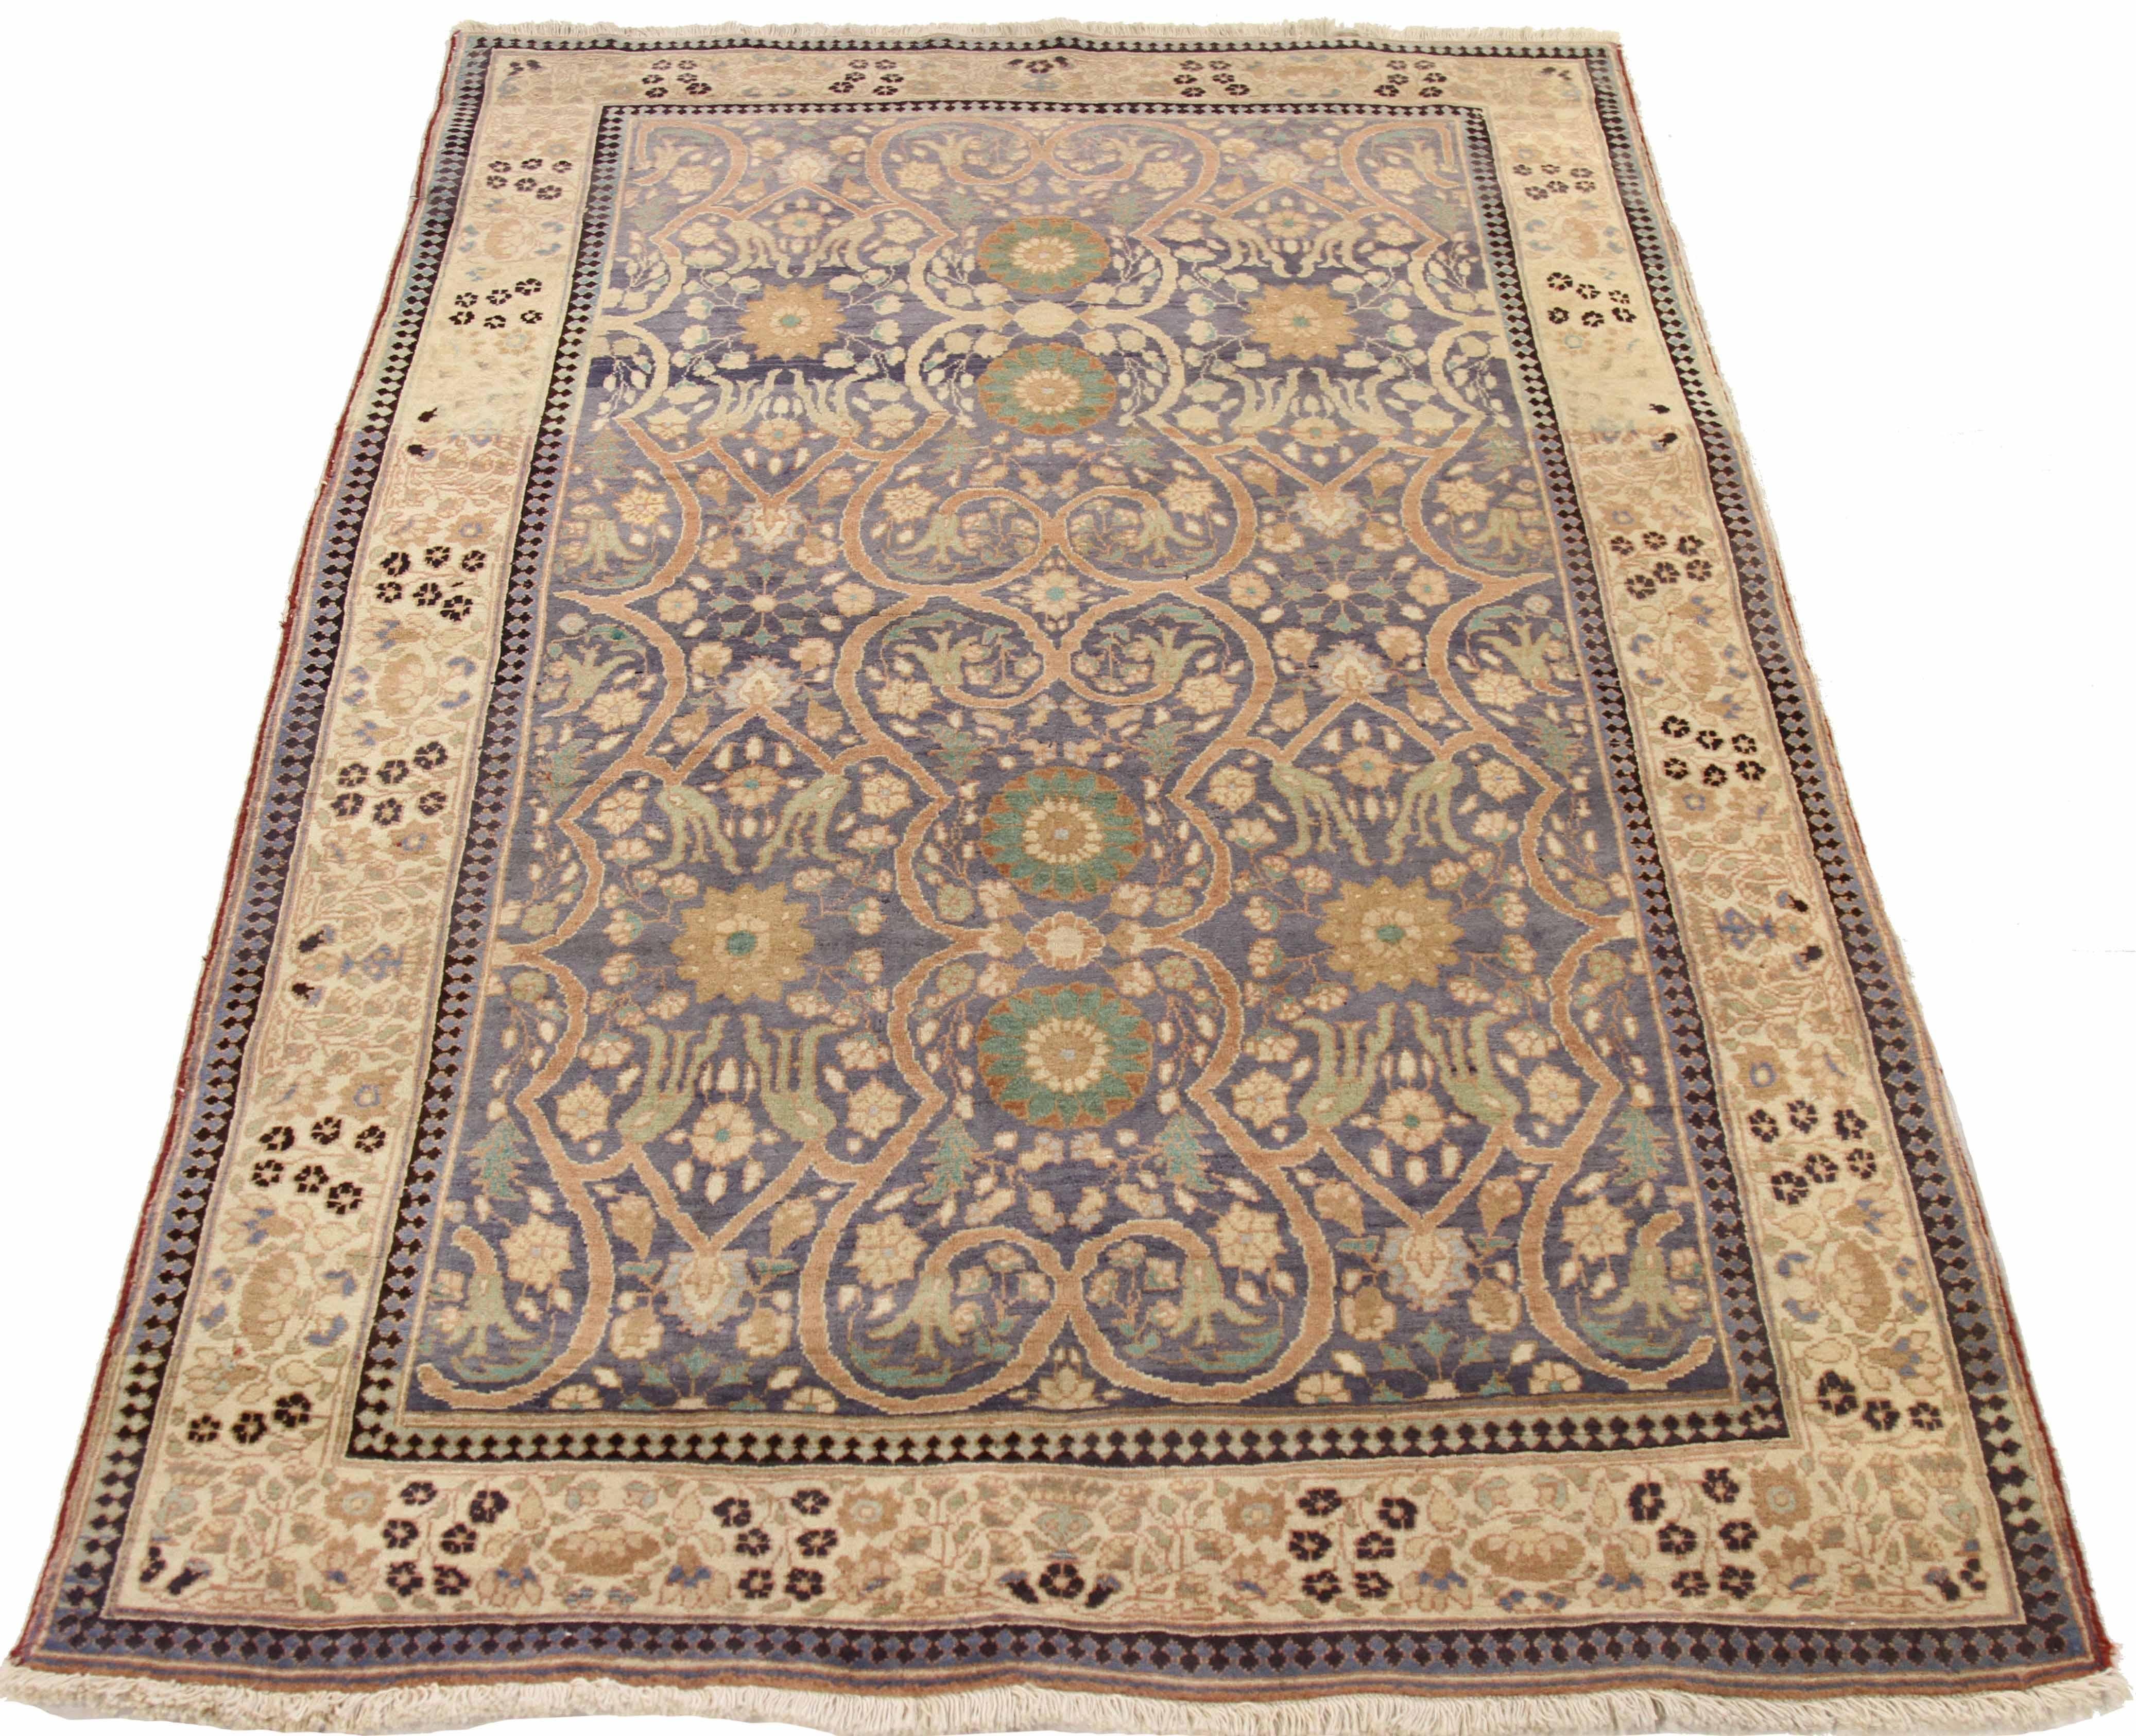 Antique Indian area rug handwoven from the finest sheep’s wool. It’s colored with all-natural vegetable dyes that are safe for humans and pets. It’s a traditional Agra design handwoven by expert artisans. It’s a lovely area rug that can be